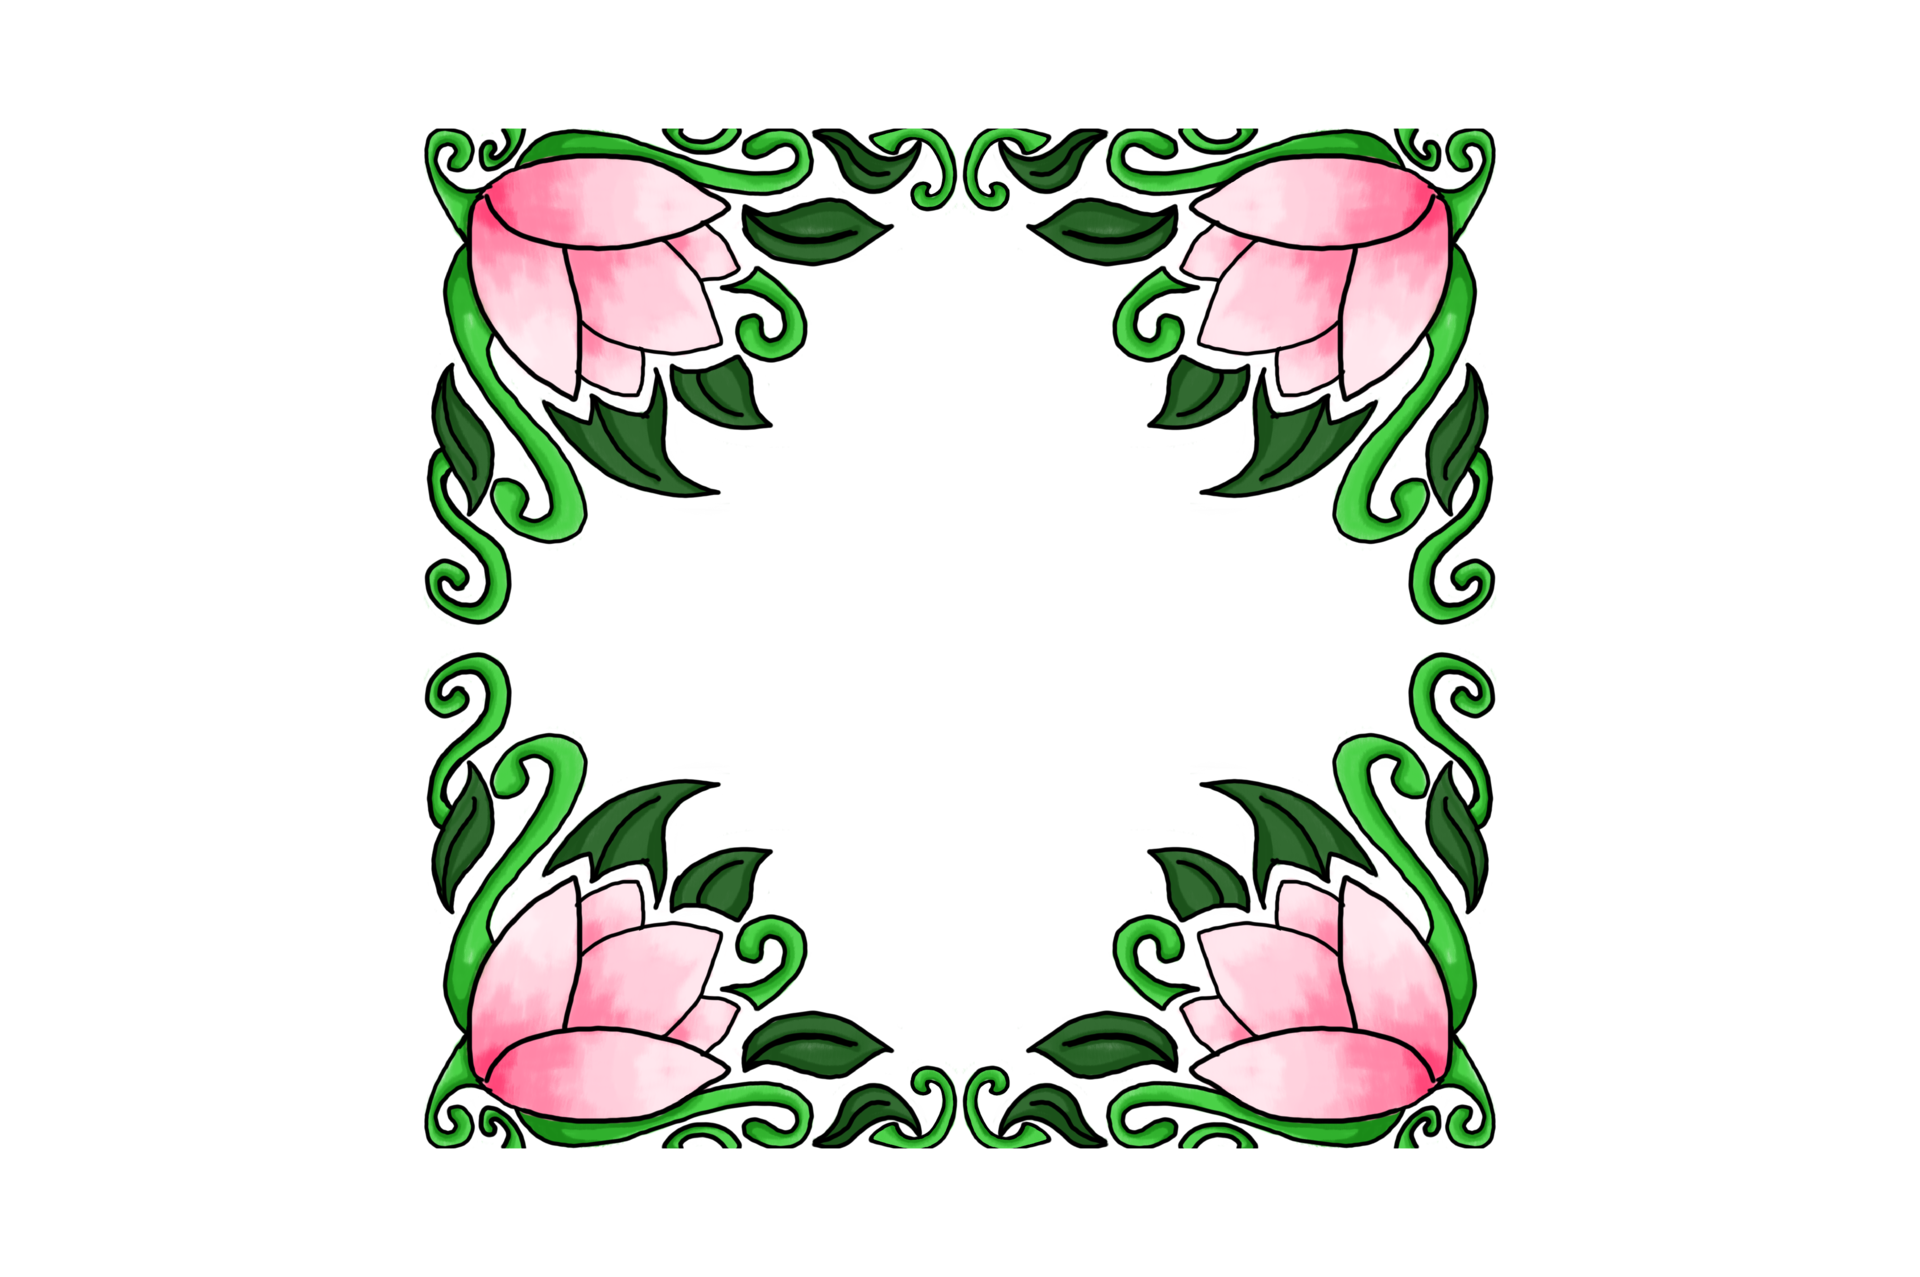 Ornament Border Design With Flora And